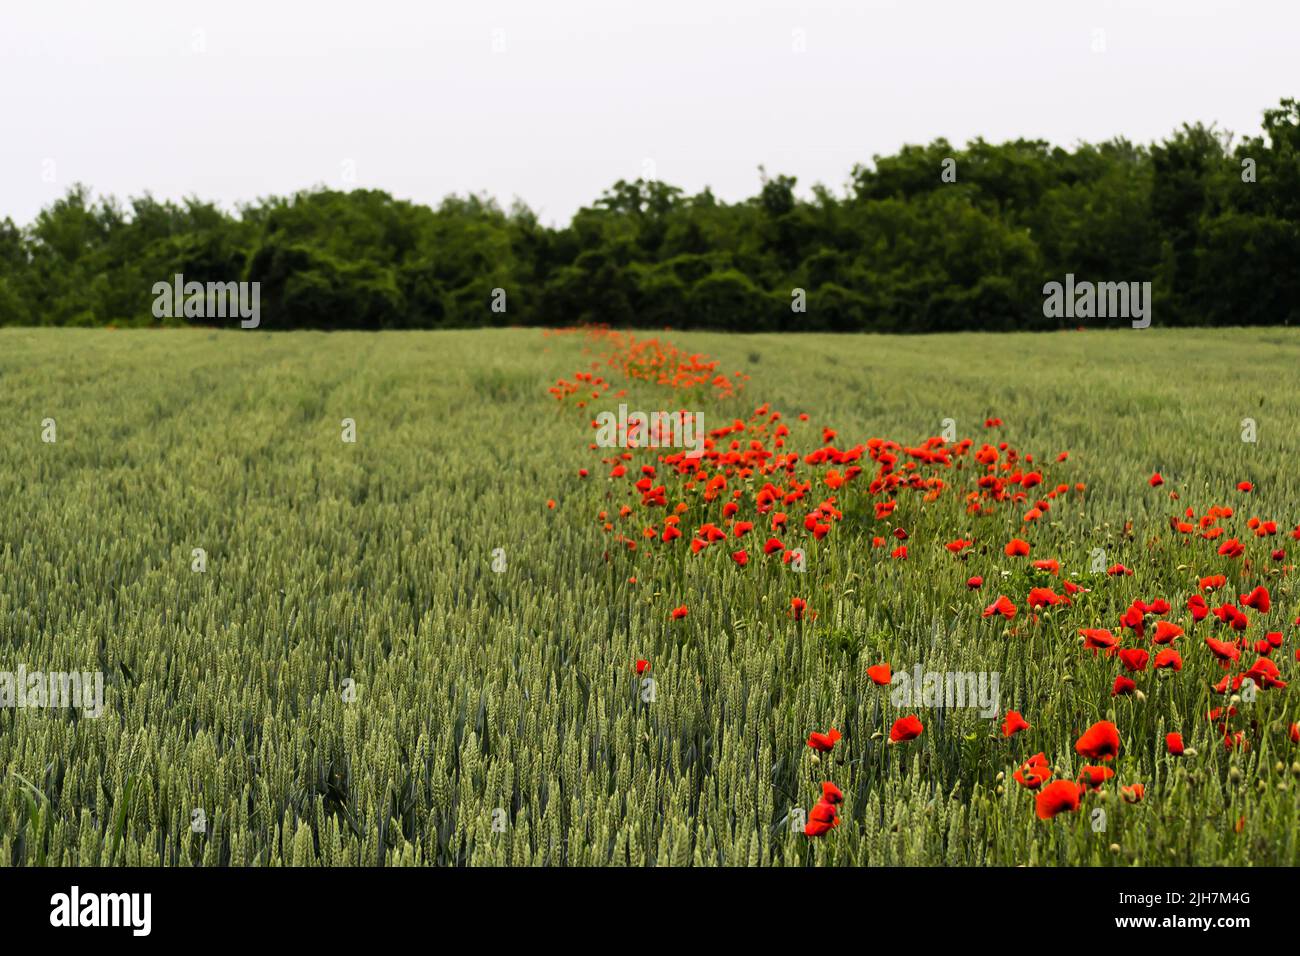 Blooming red common poppy flowers on a field with wheat. Stock Photo